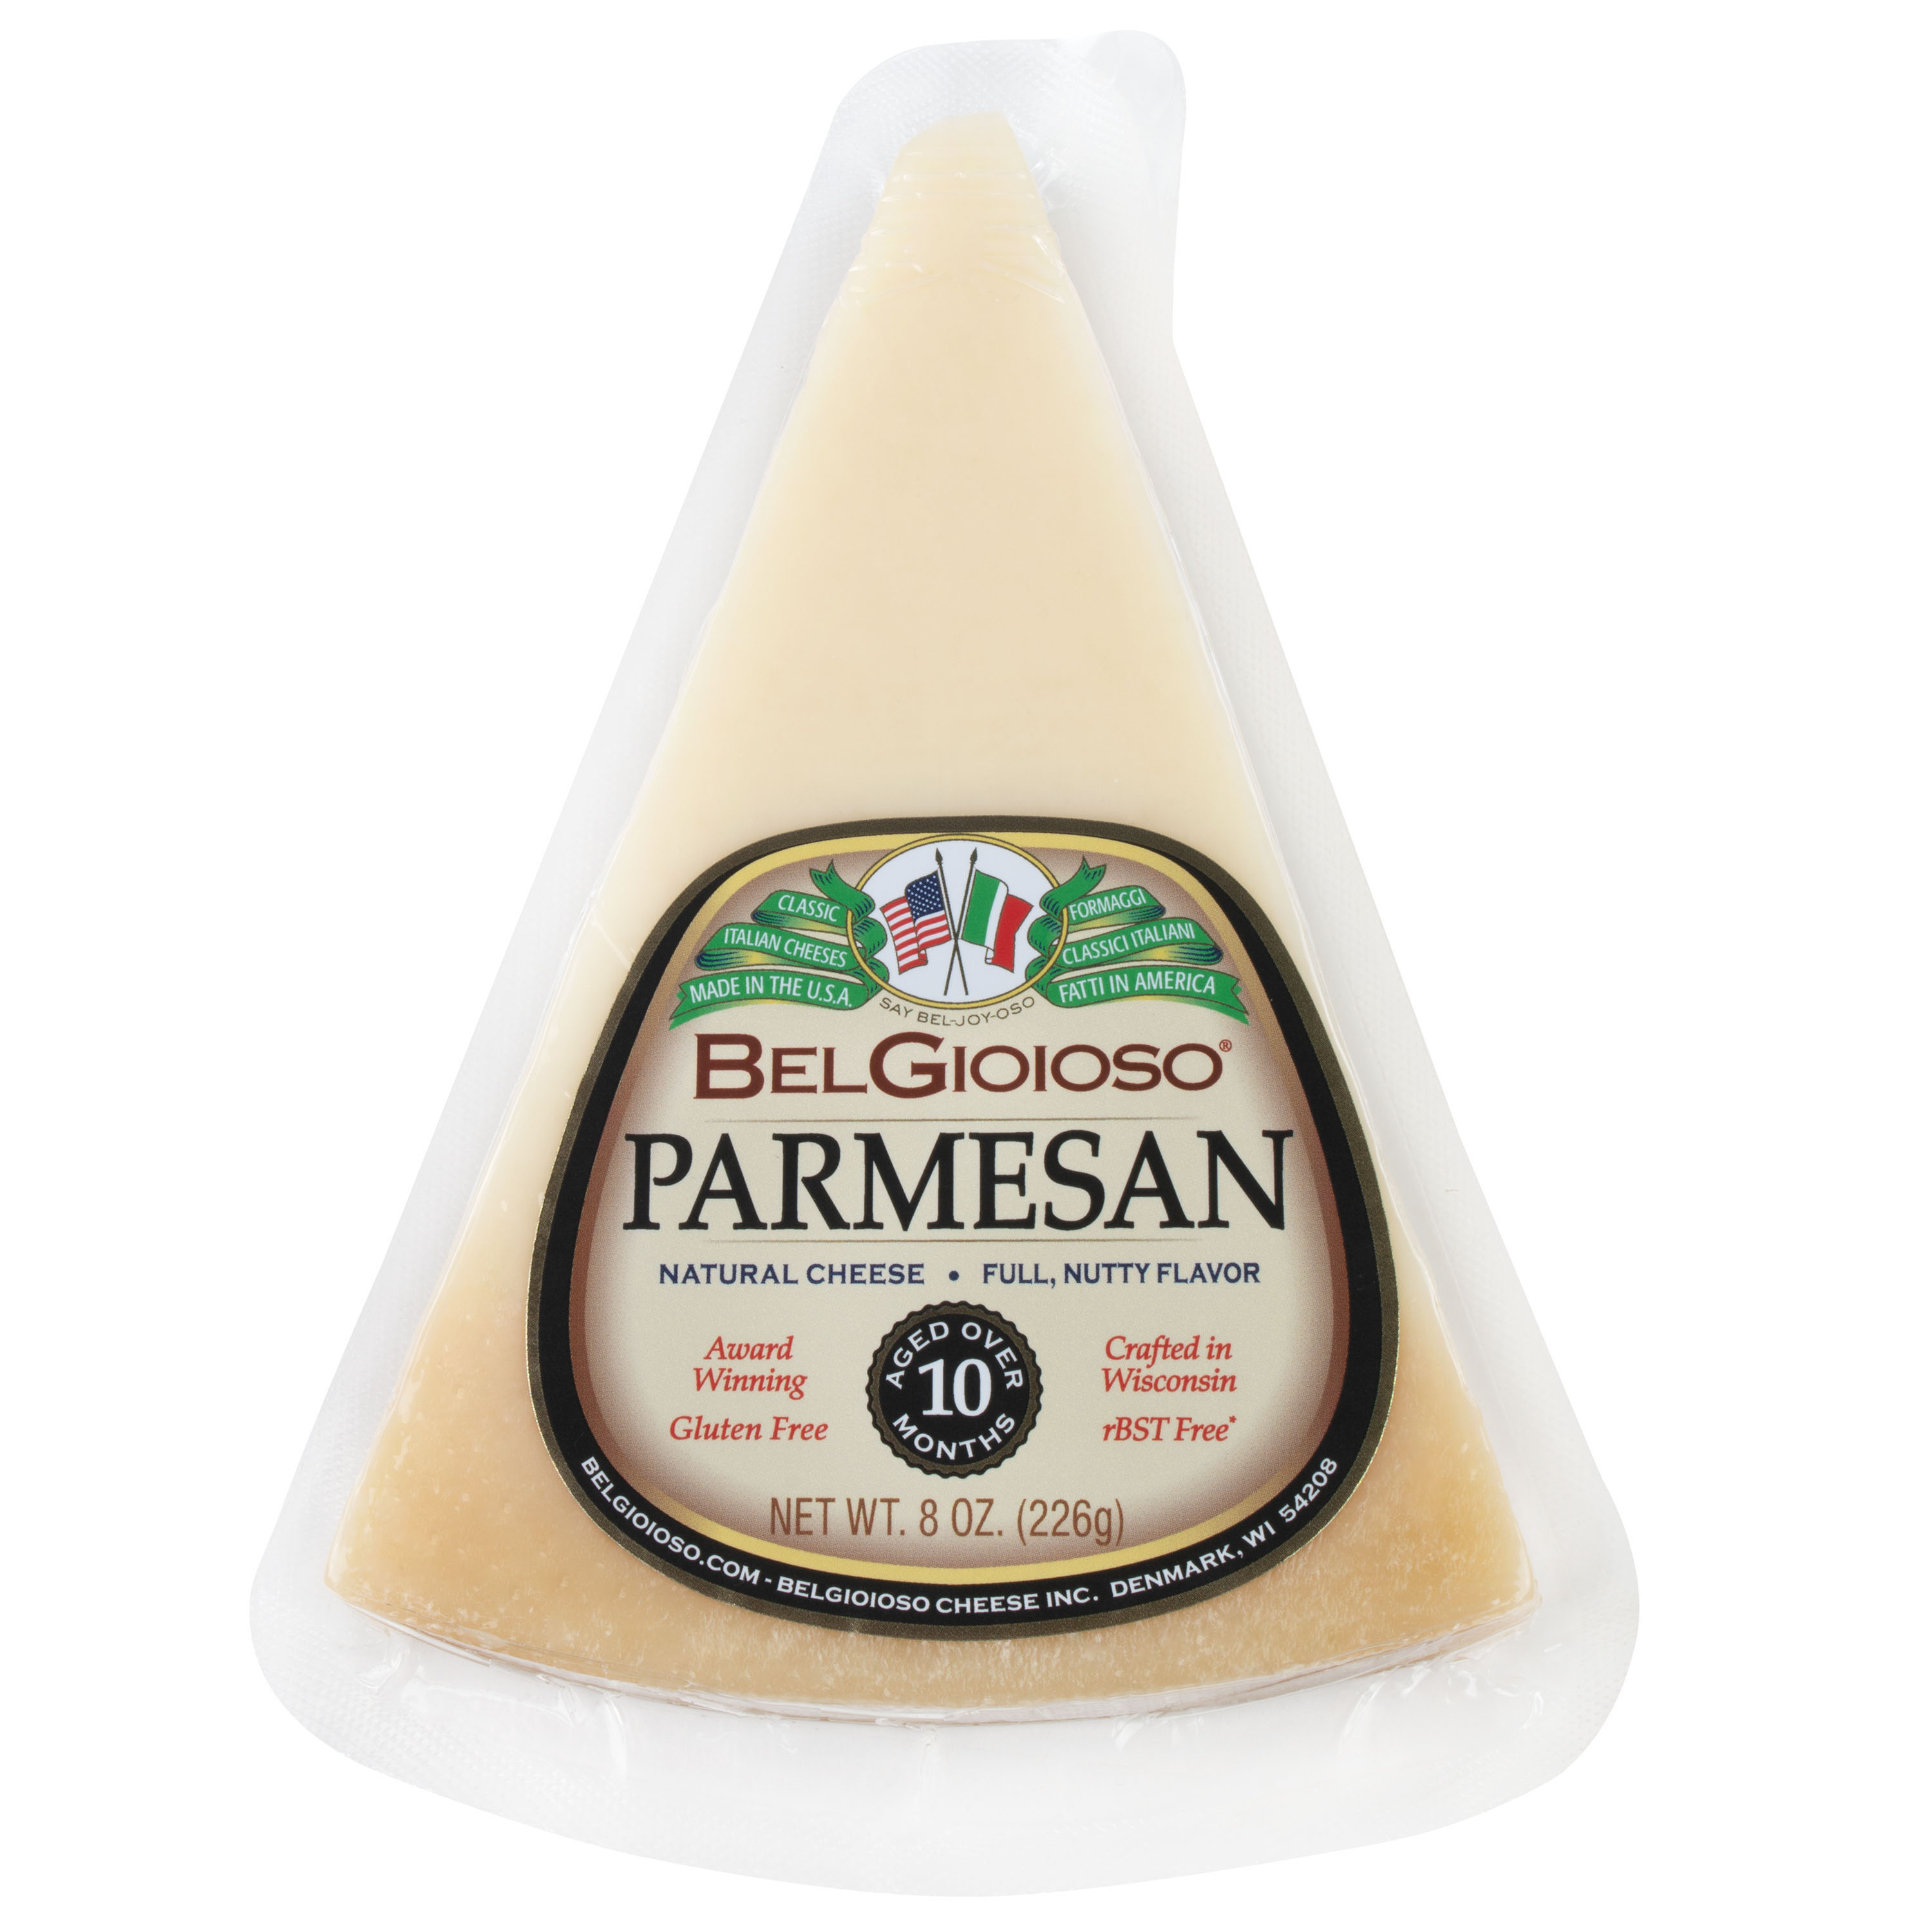 BelGioioso Parmesan Cheese Wedge Specialty Hard Cheese, 8 oz Refrigerated Plastic Packet - image 3 of 9